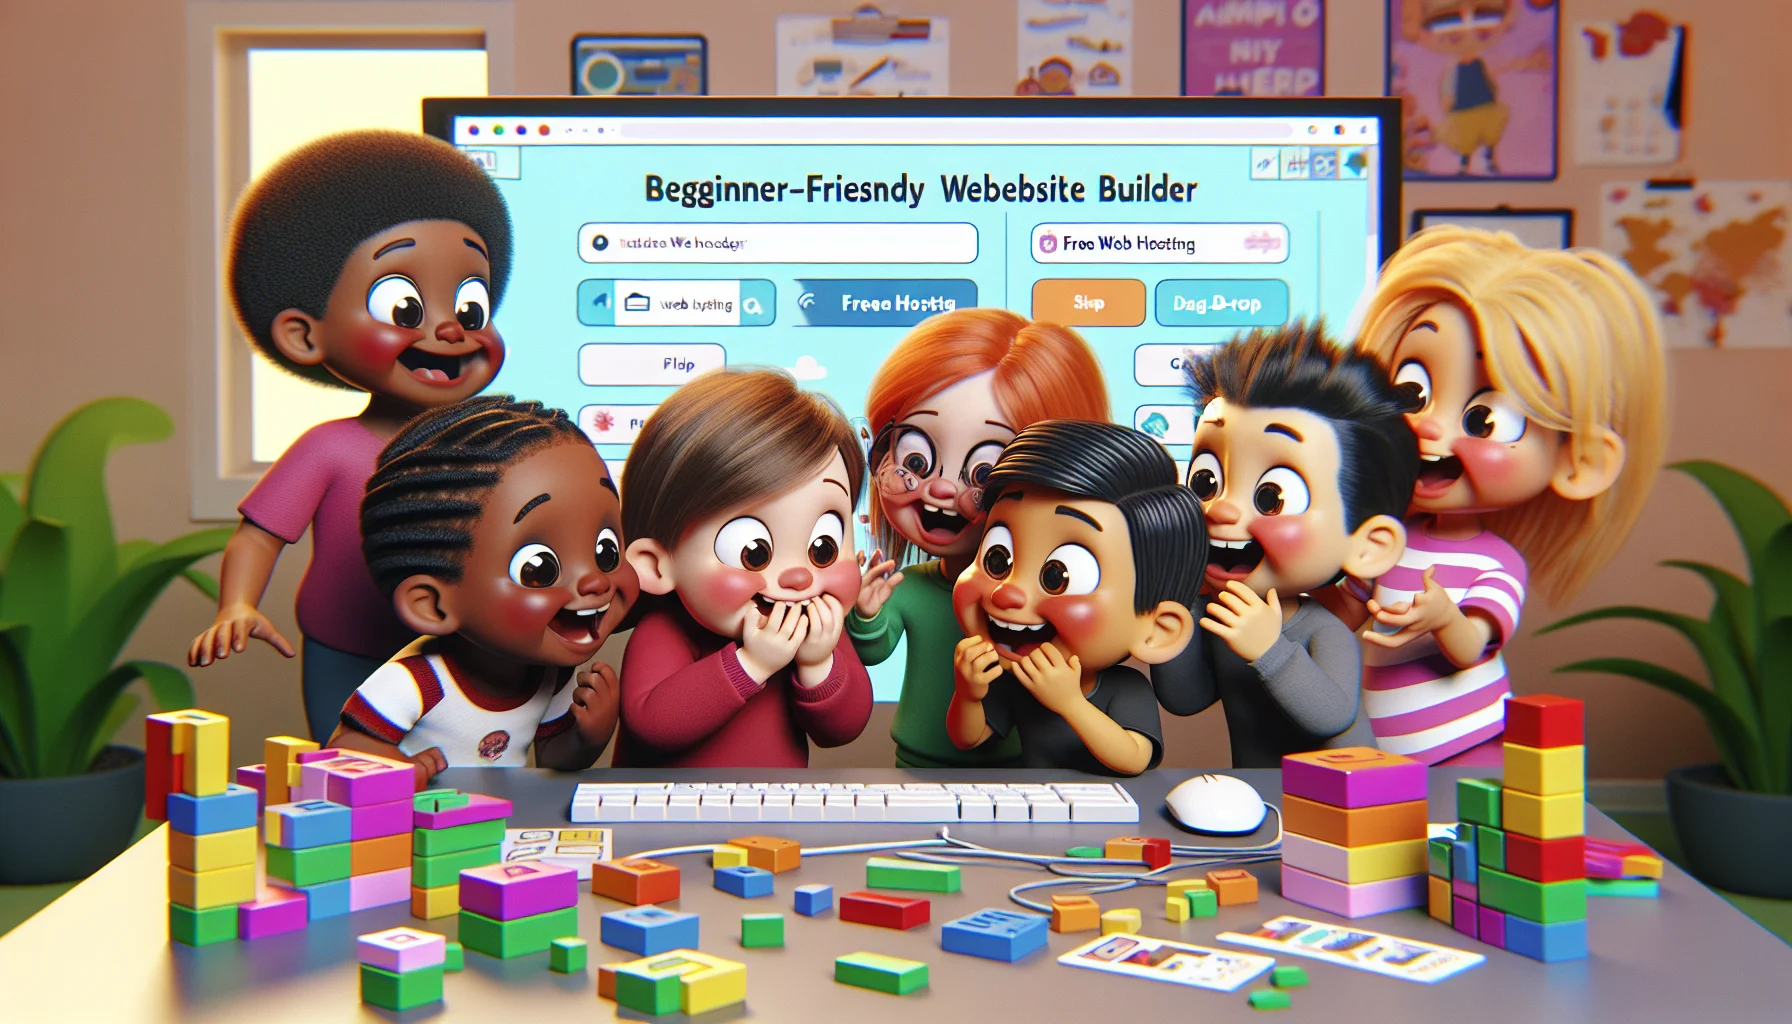 Render a realistic image showing an amusing scenario where kids of various descents including Hispanic, Black, Asian and Caucasian are building a website together. They are curiously exploring the interface of a beginner-friendly website builder, with large, colorful icons and a drag-and-drop system. There's a sigh of comic relief on their faces as they find an enticing 'Free Web Hosting' button. The atmosphere is filled with creativity, curiosity and fun, vividly portraying the joy of learning and building websites at a young age.